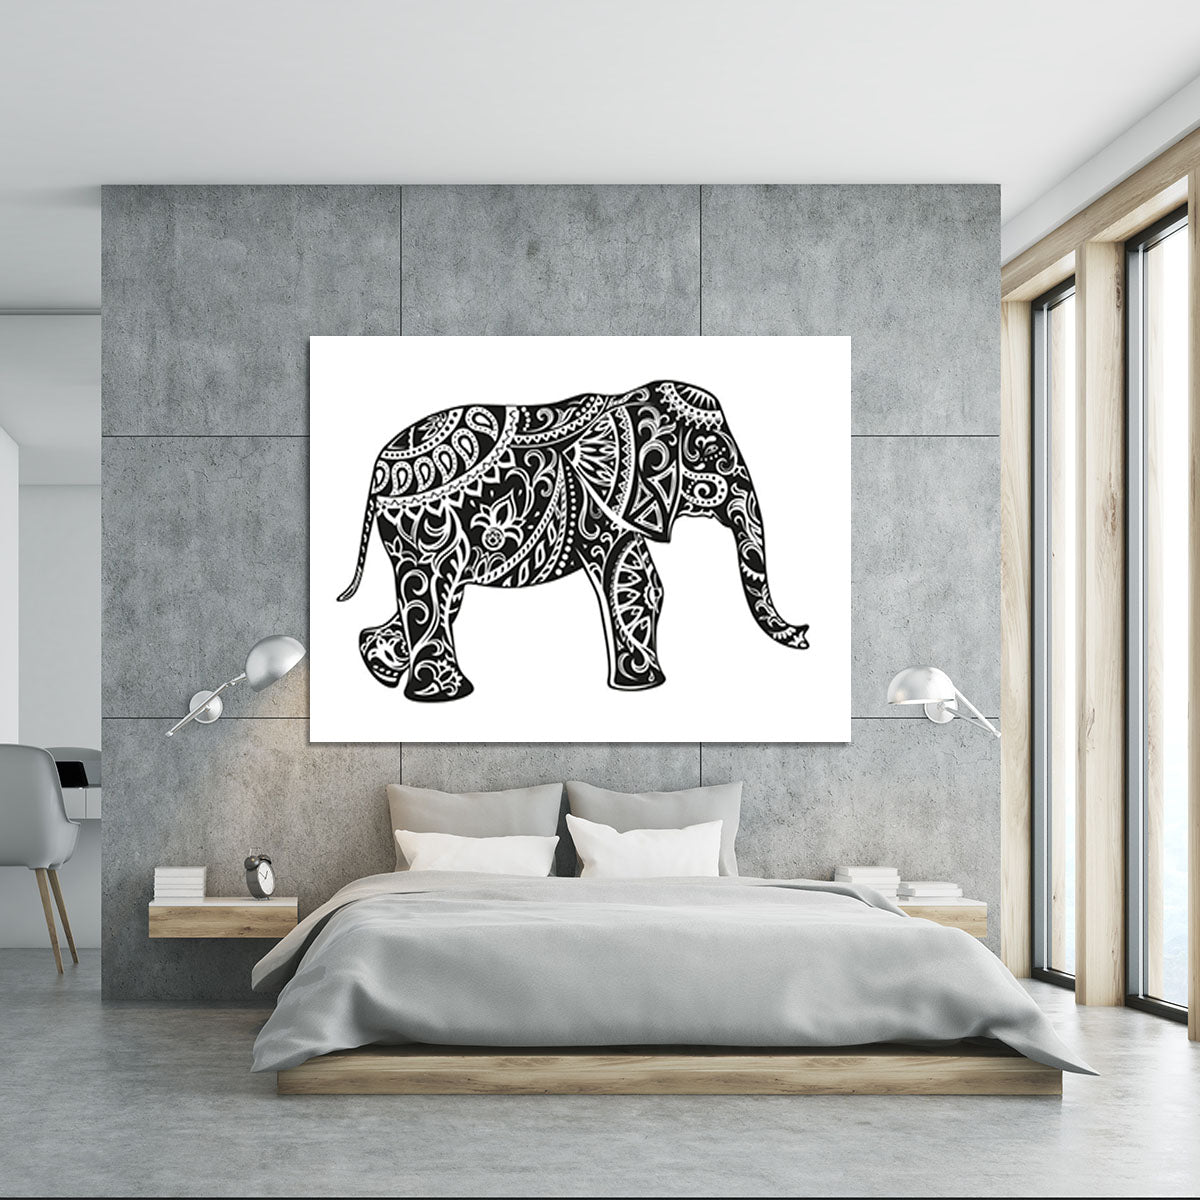 The stylized figure of an elephant in the festive patterns Canvas Print or Poster - Canvas Art Rocks - 5